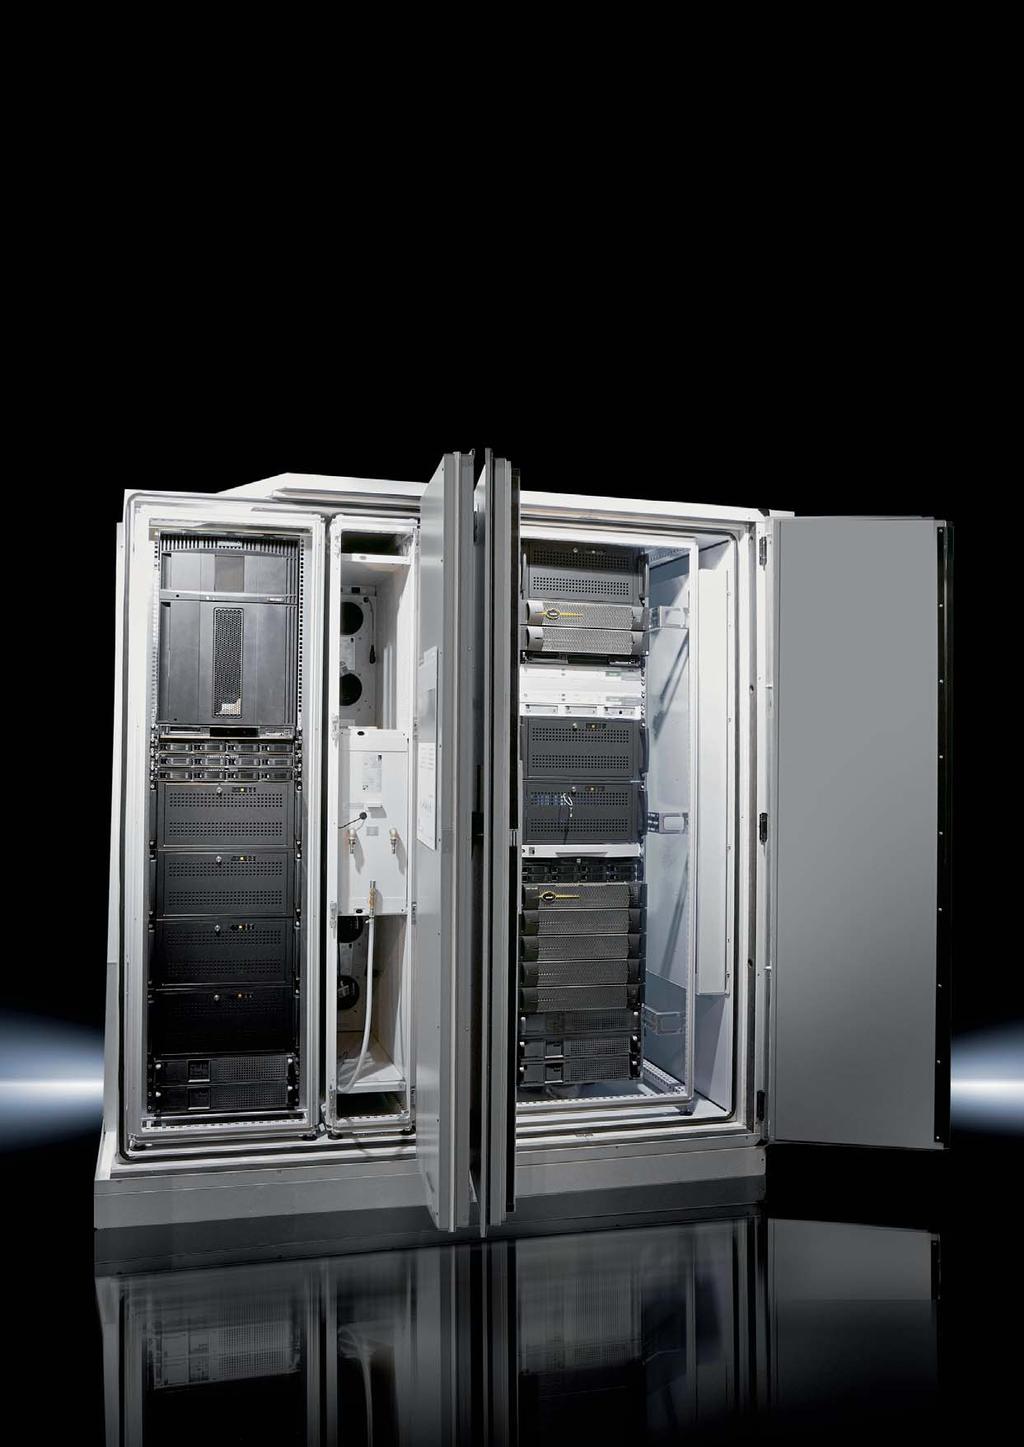 Rittal equips a new data centre for Erco Reliability through redundancy The